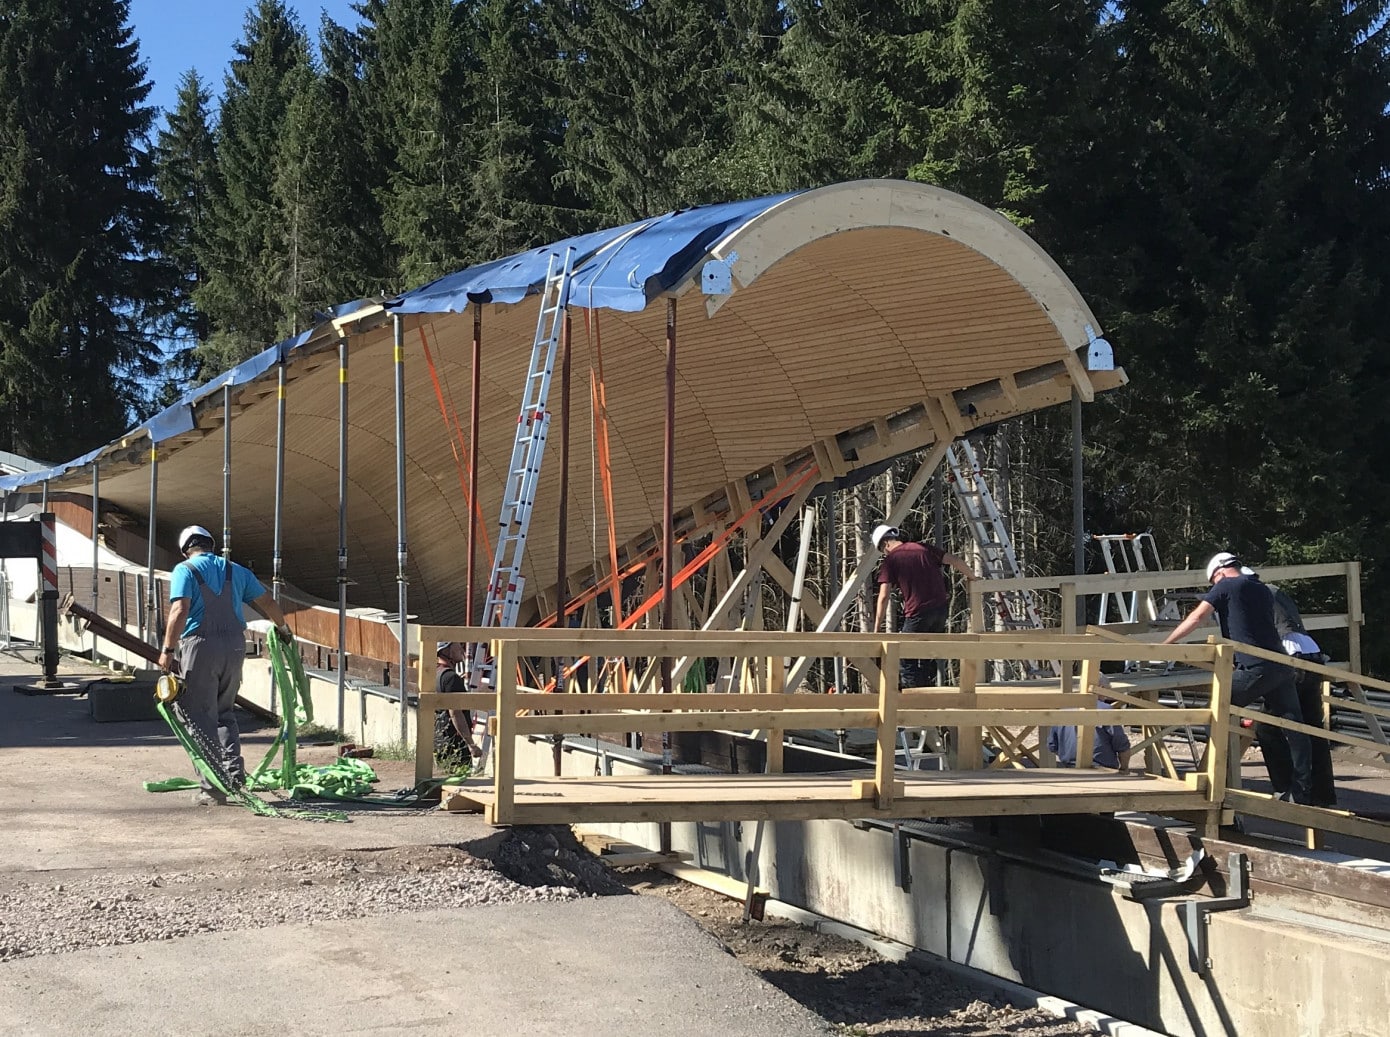 ZÜBLIN Timber to install 3,500 m2 of timber roofing for the bobsleigh, luge and skeleton track in Oberhof, Germany